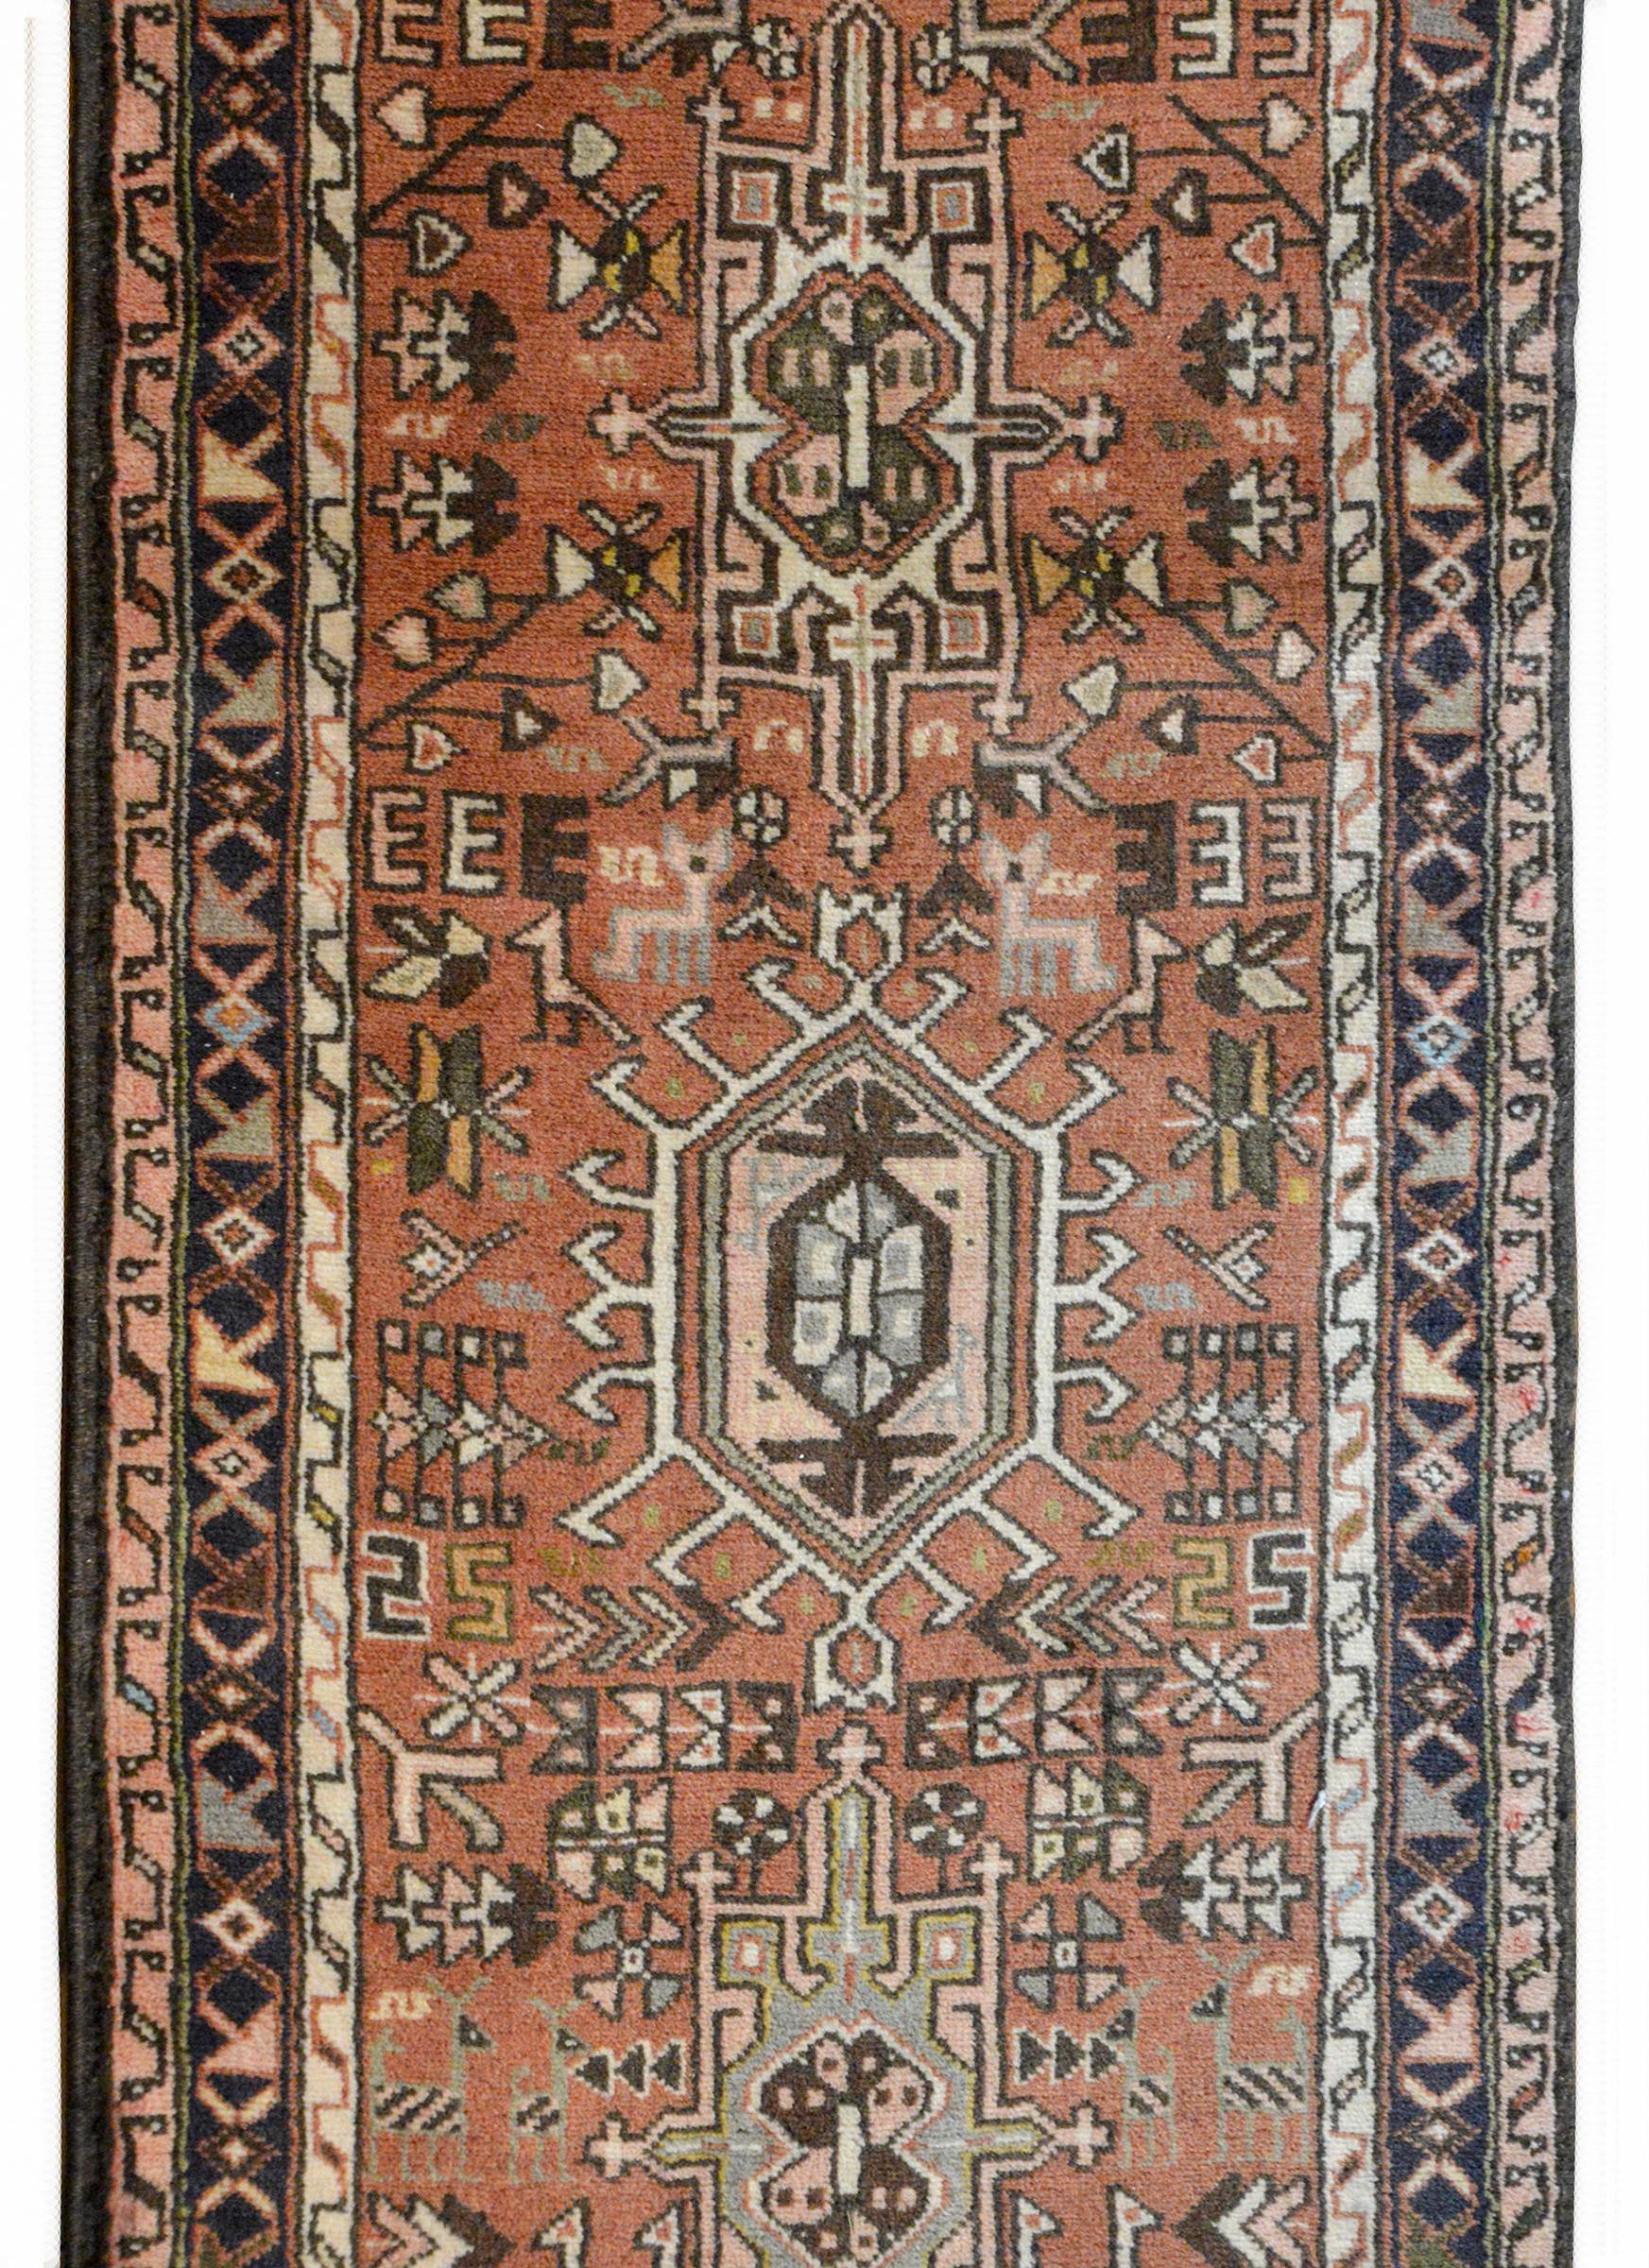 A wonderful early 20th century Persian Karadja runner with several stylized floral medallions woven in black, pink, light blue, gold, and green amidst a field of more stylized flowers against a burnt orange background. The border is wonderful